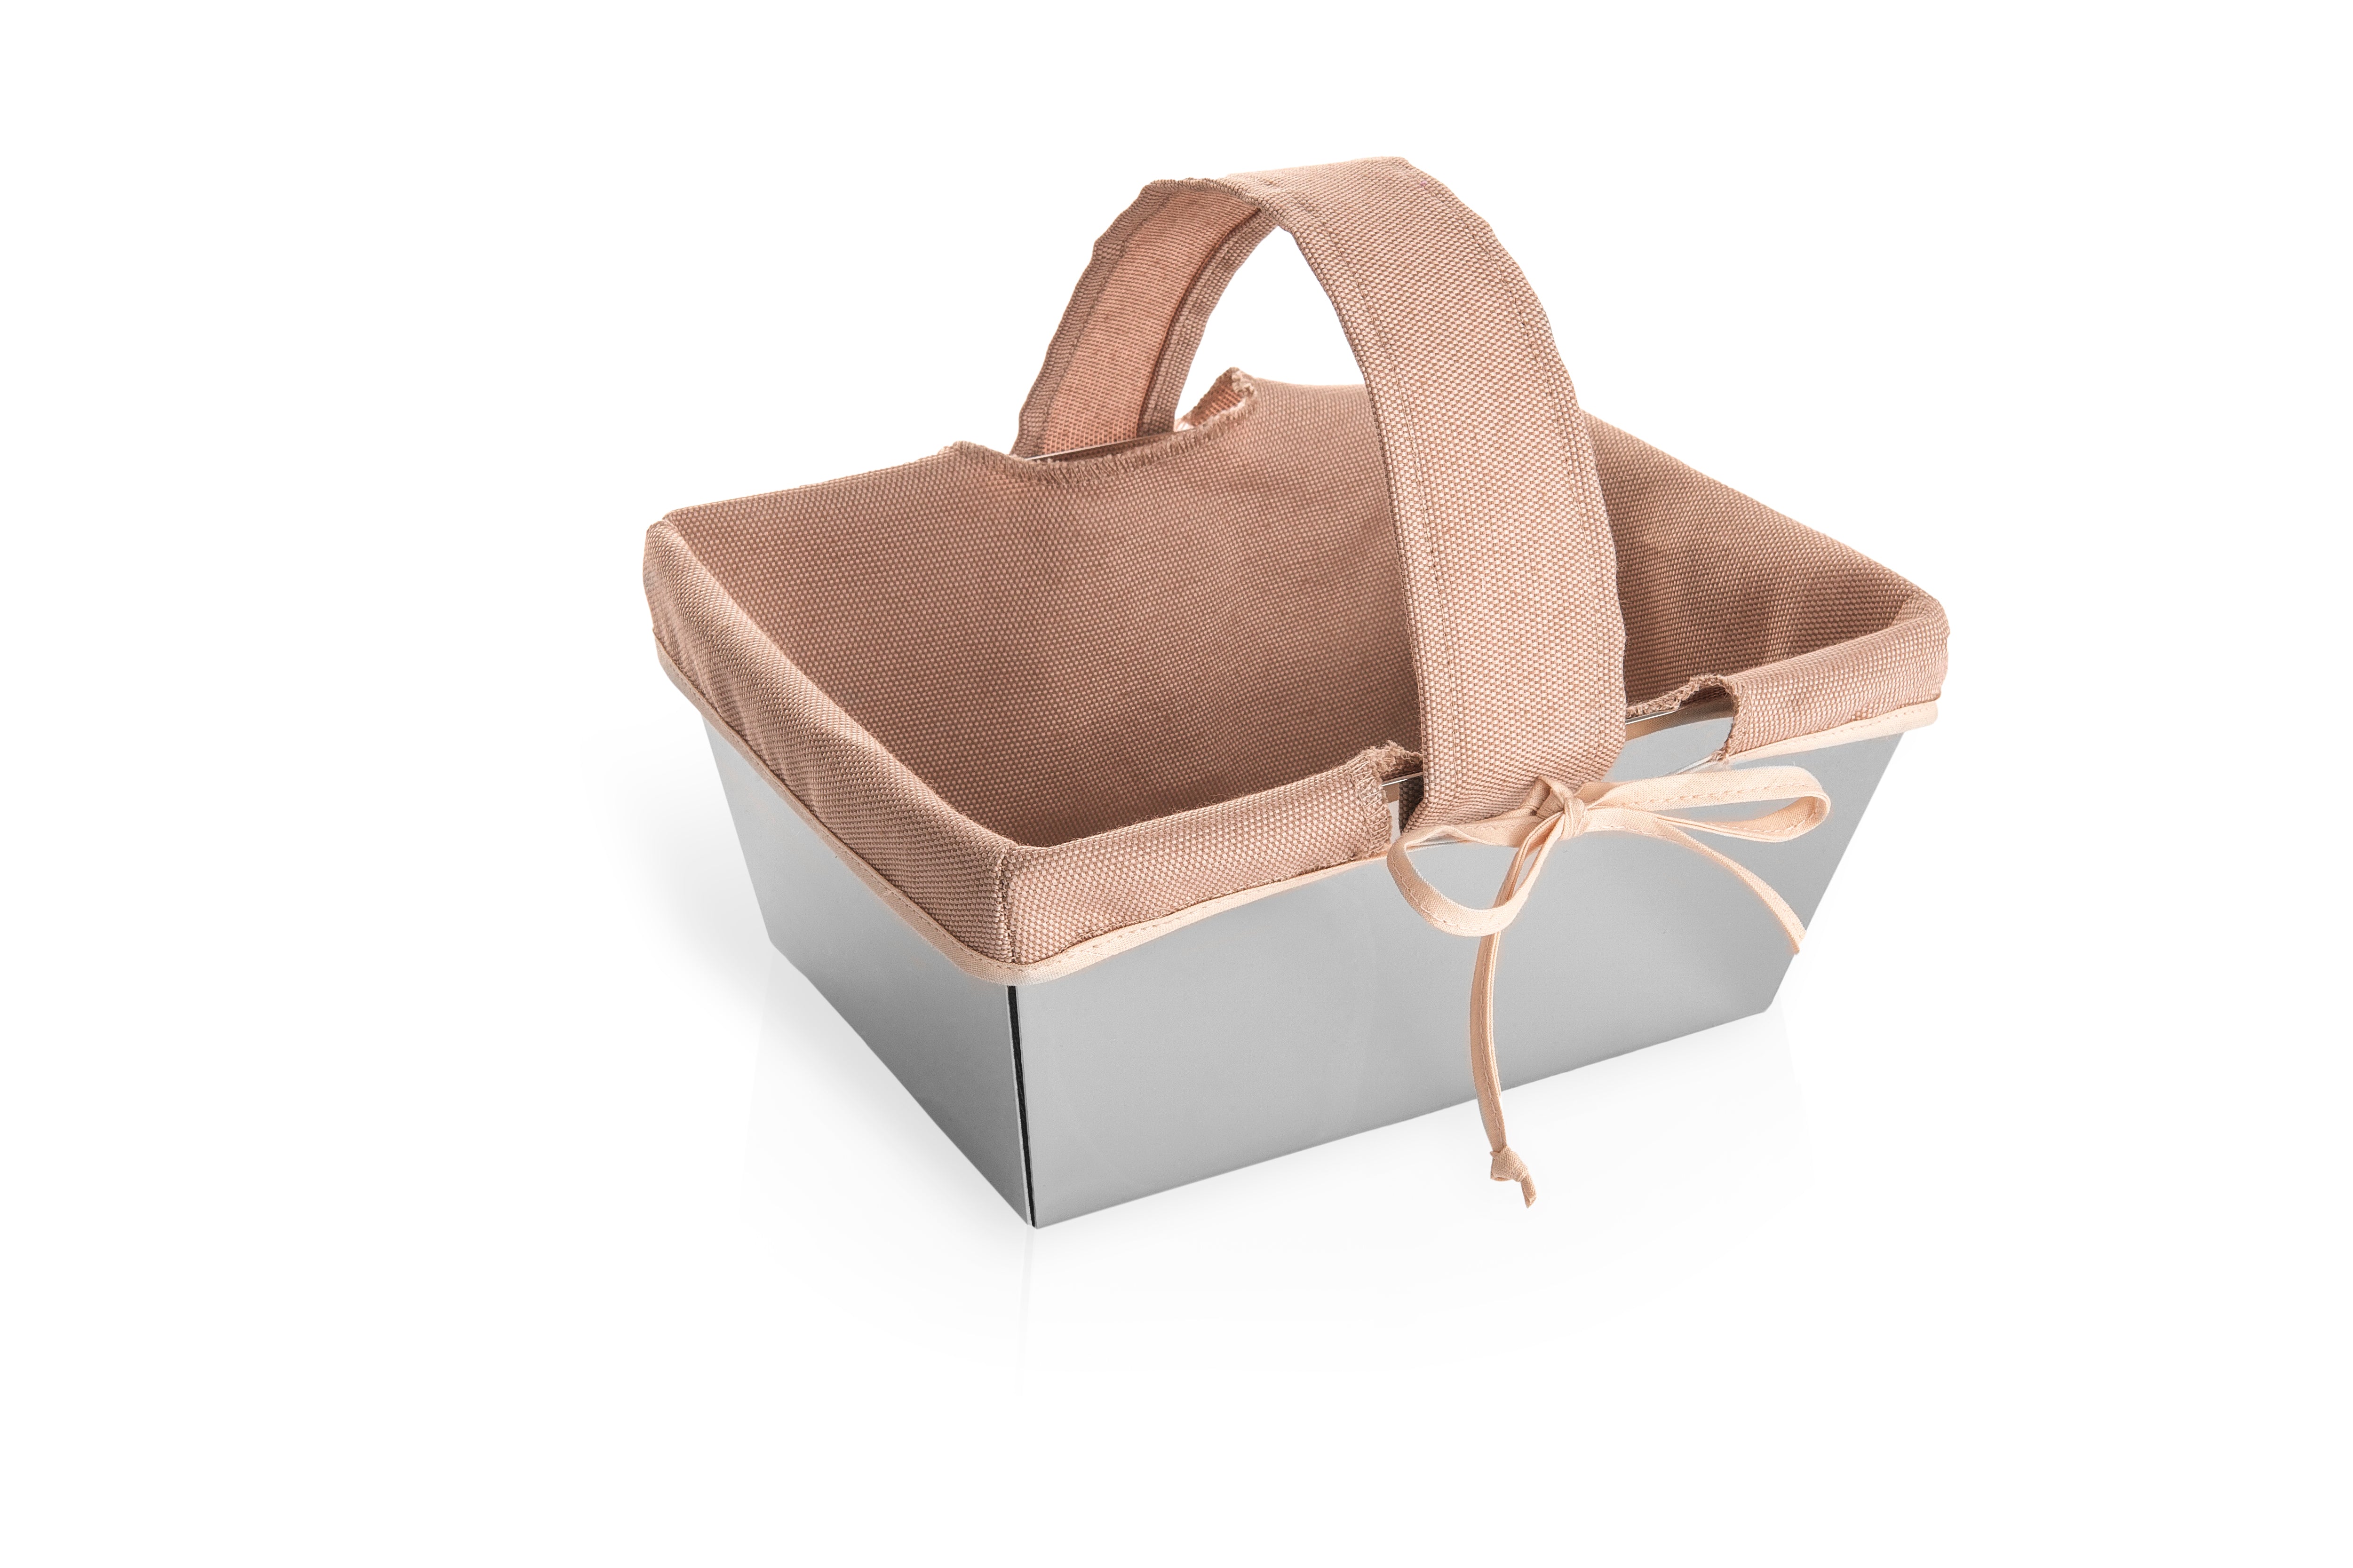 Elleffe Design Bread basket in stainless steel and fabric